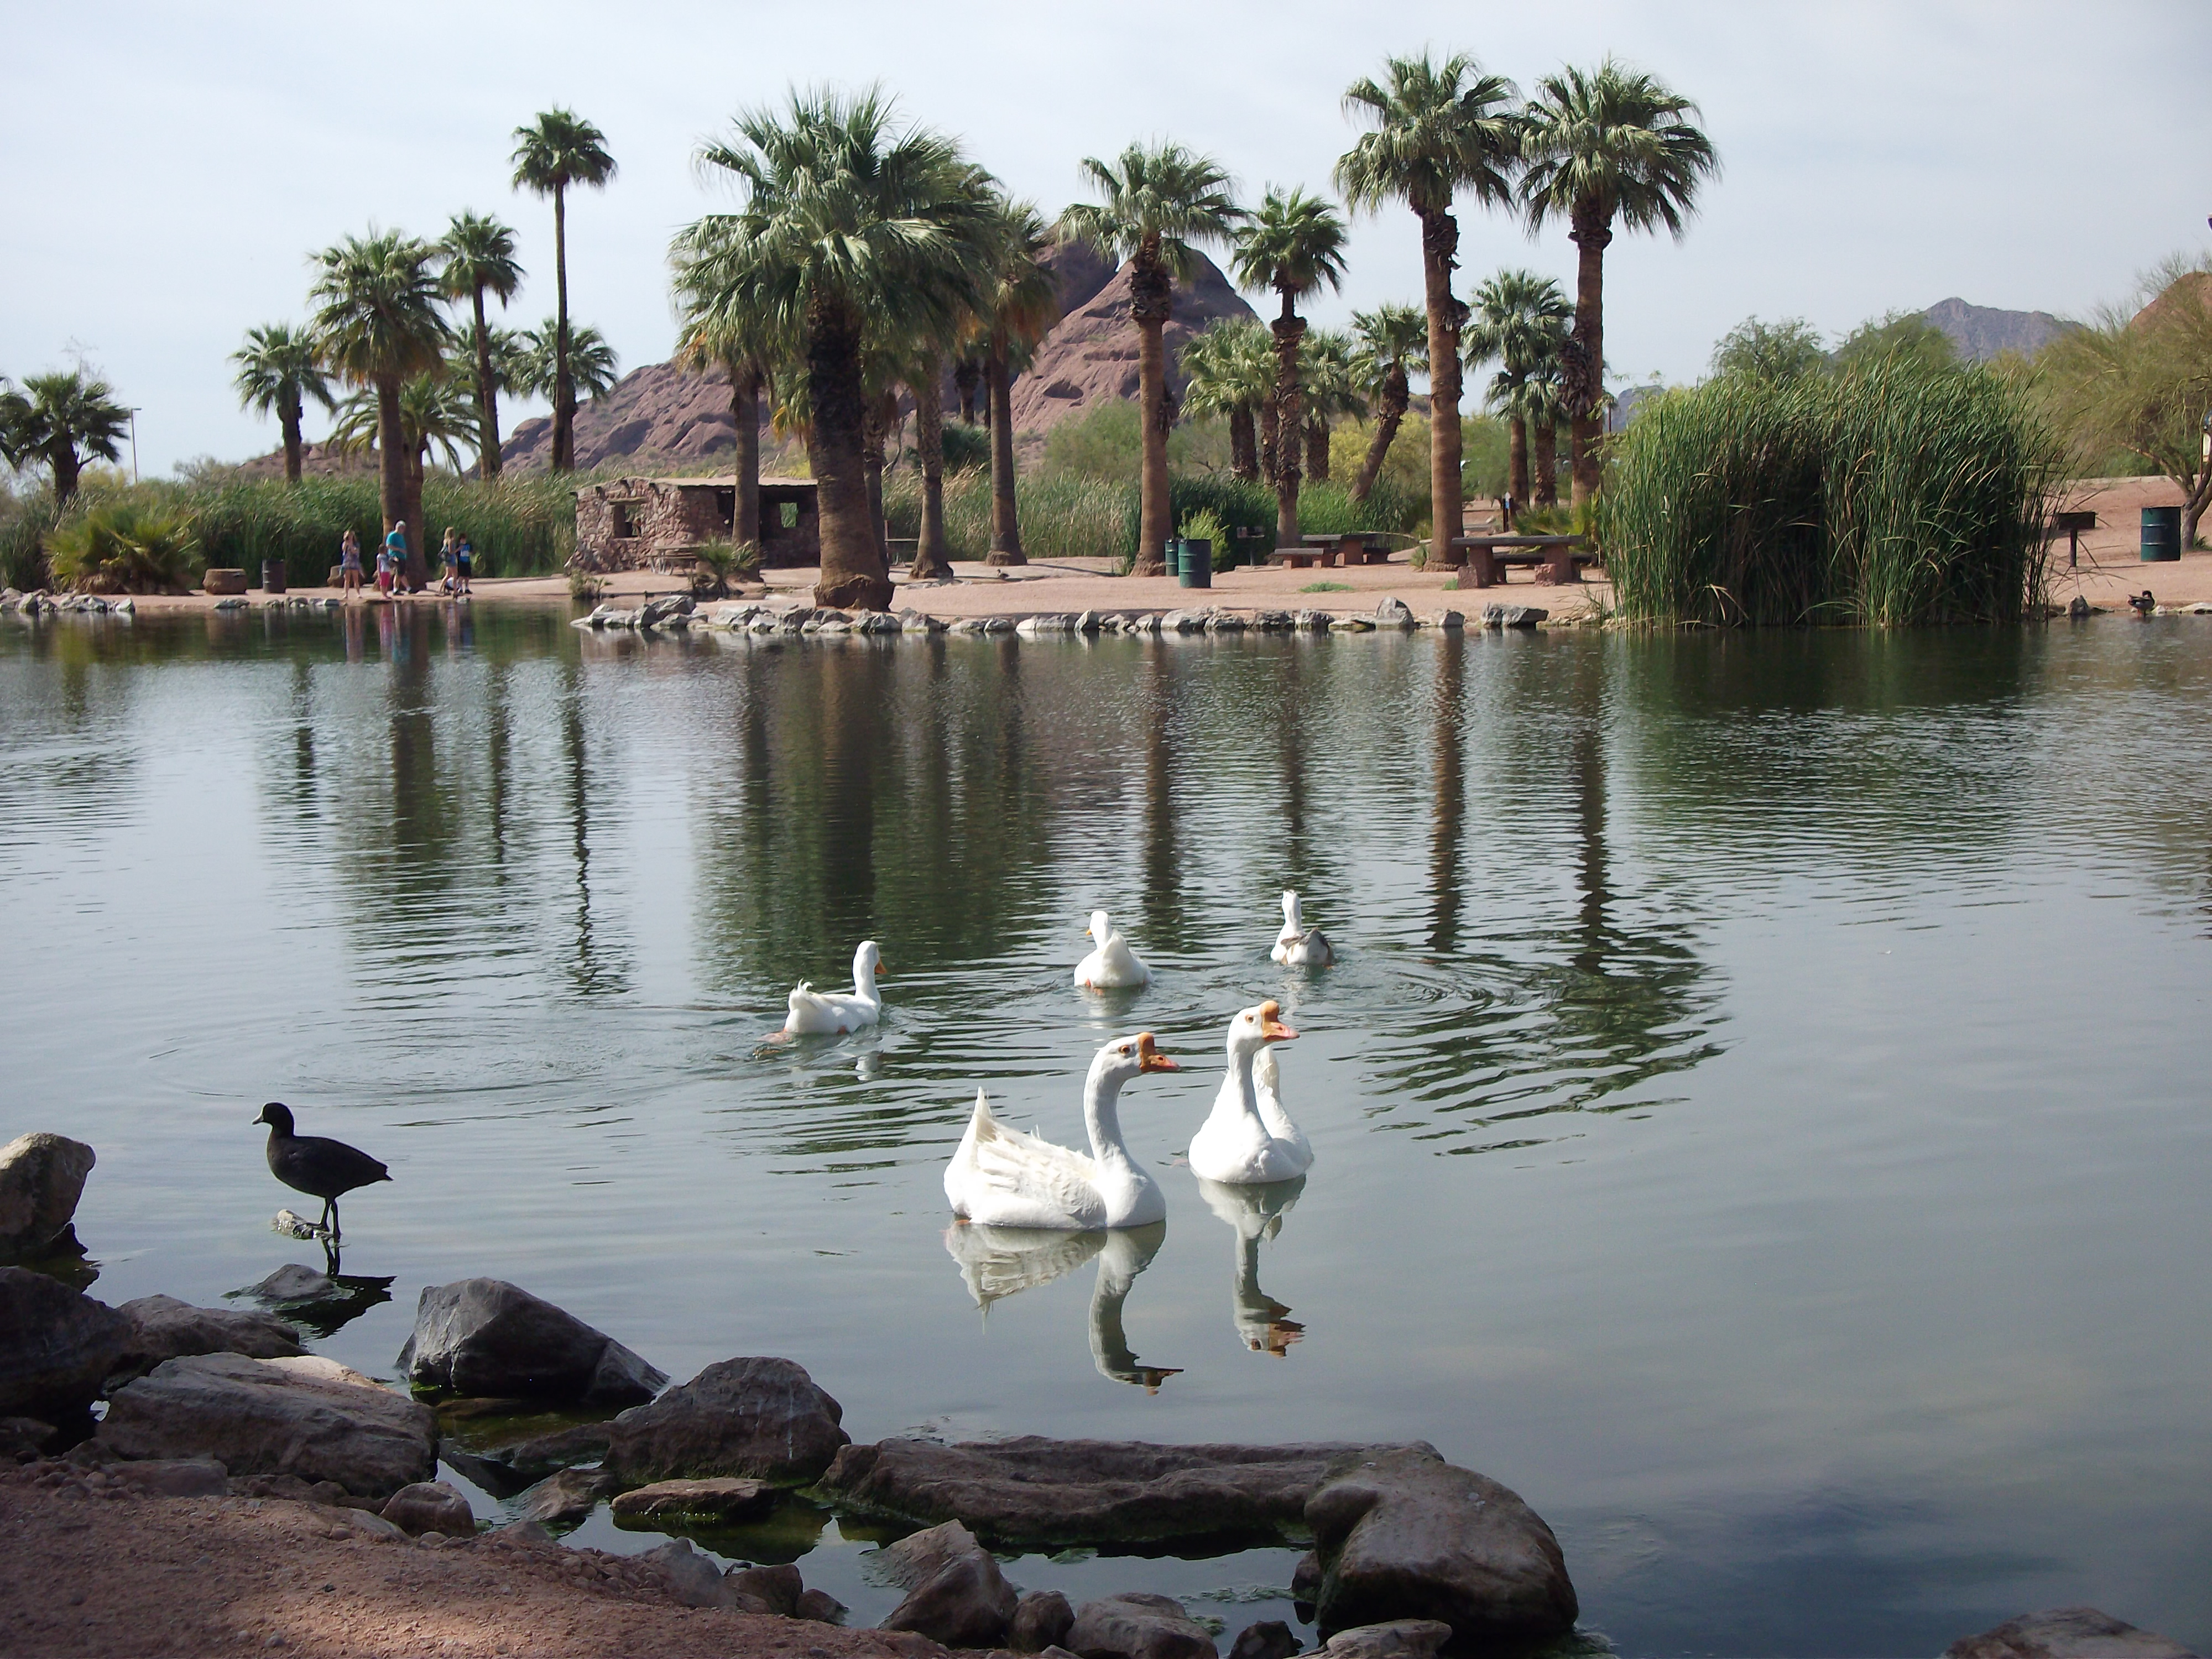 Geese and Ducks and on Papago Lake